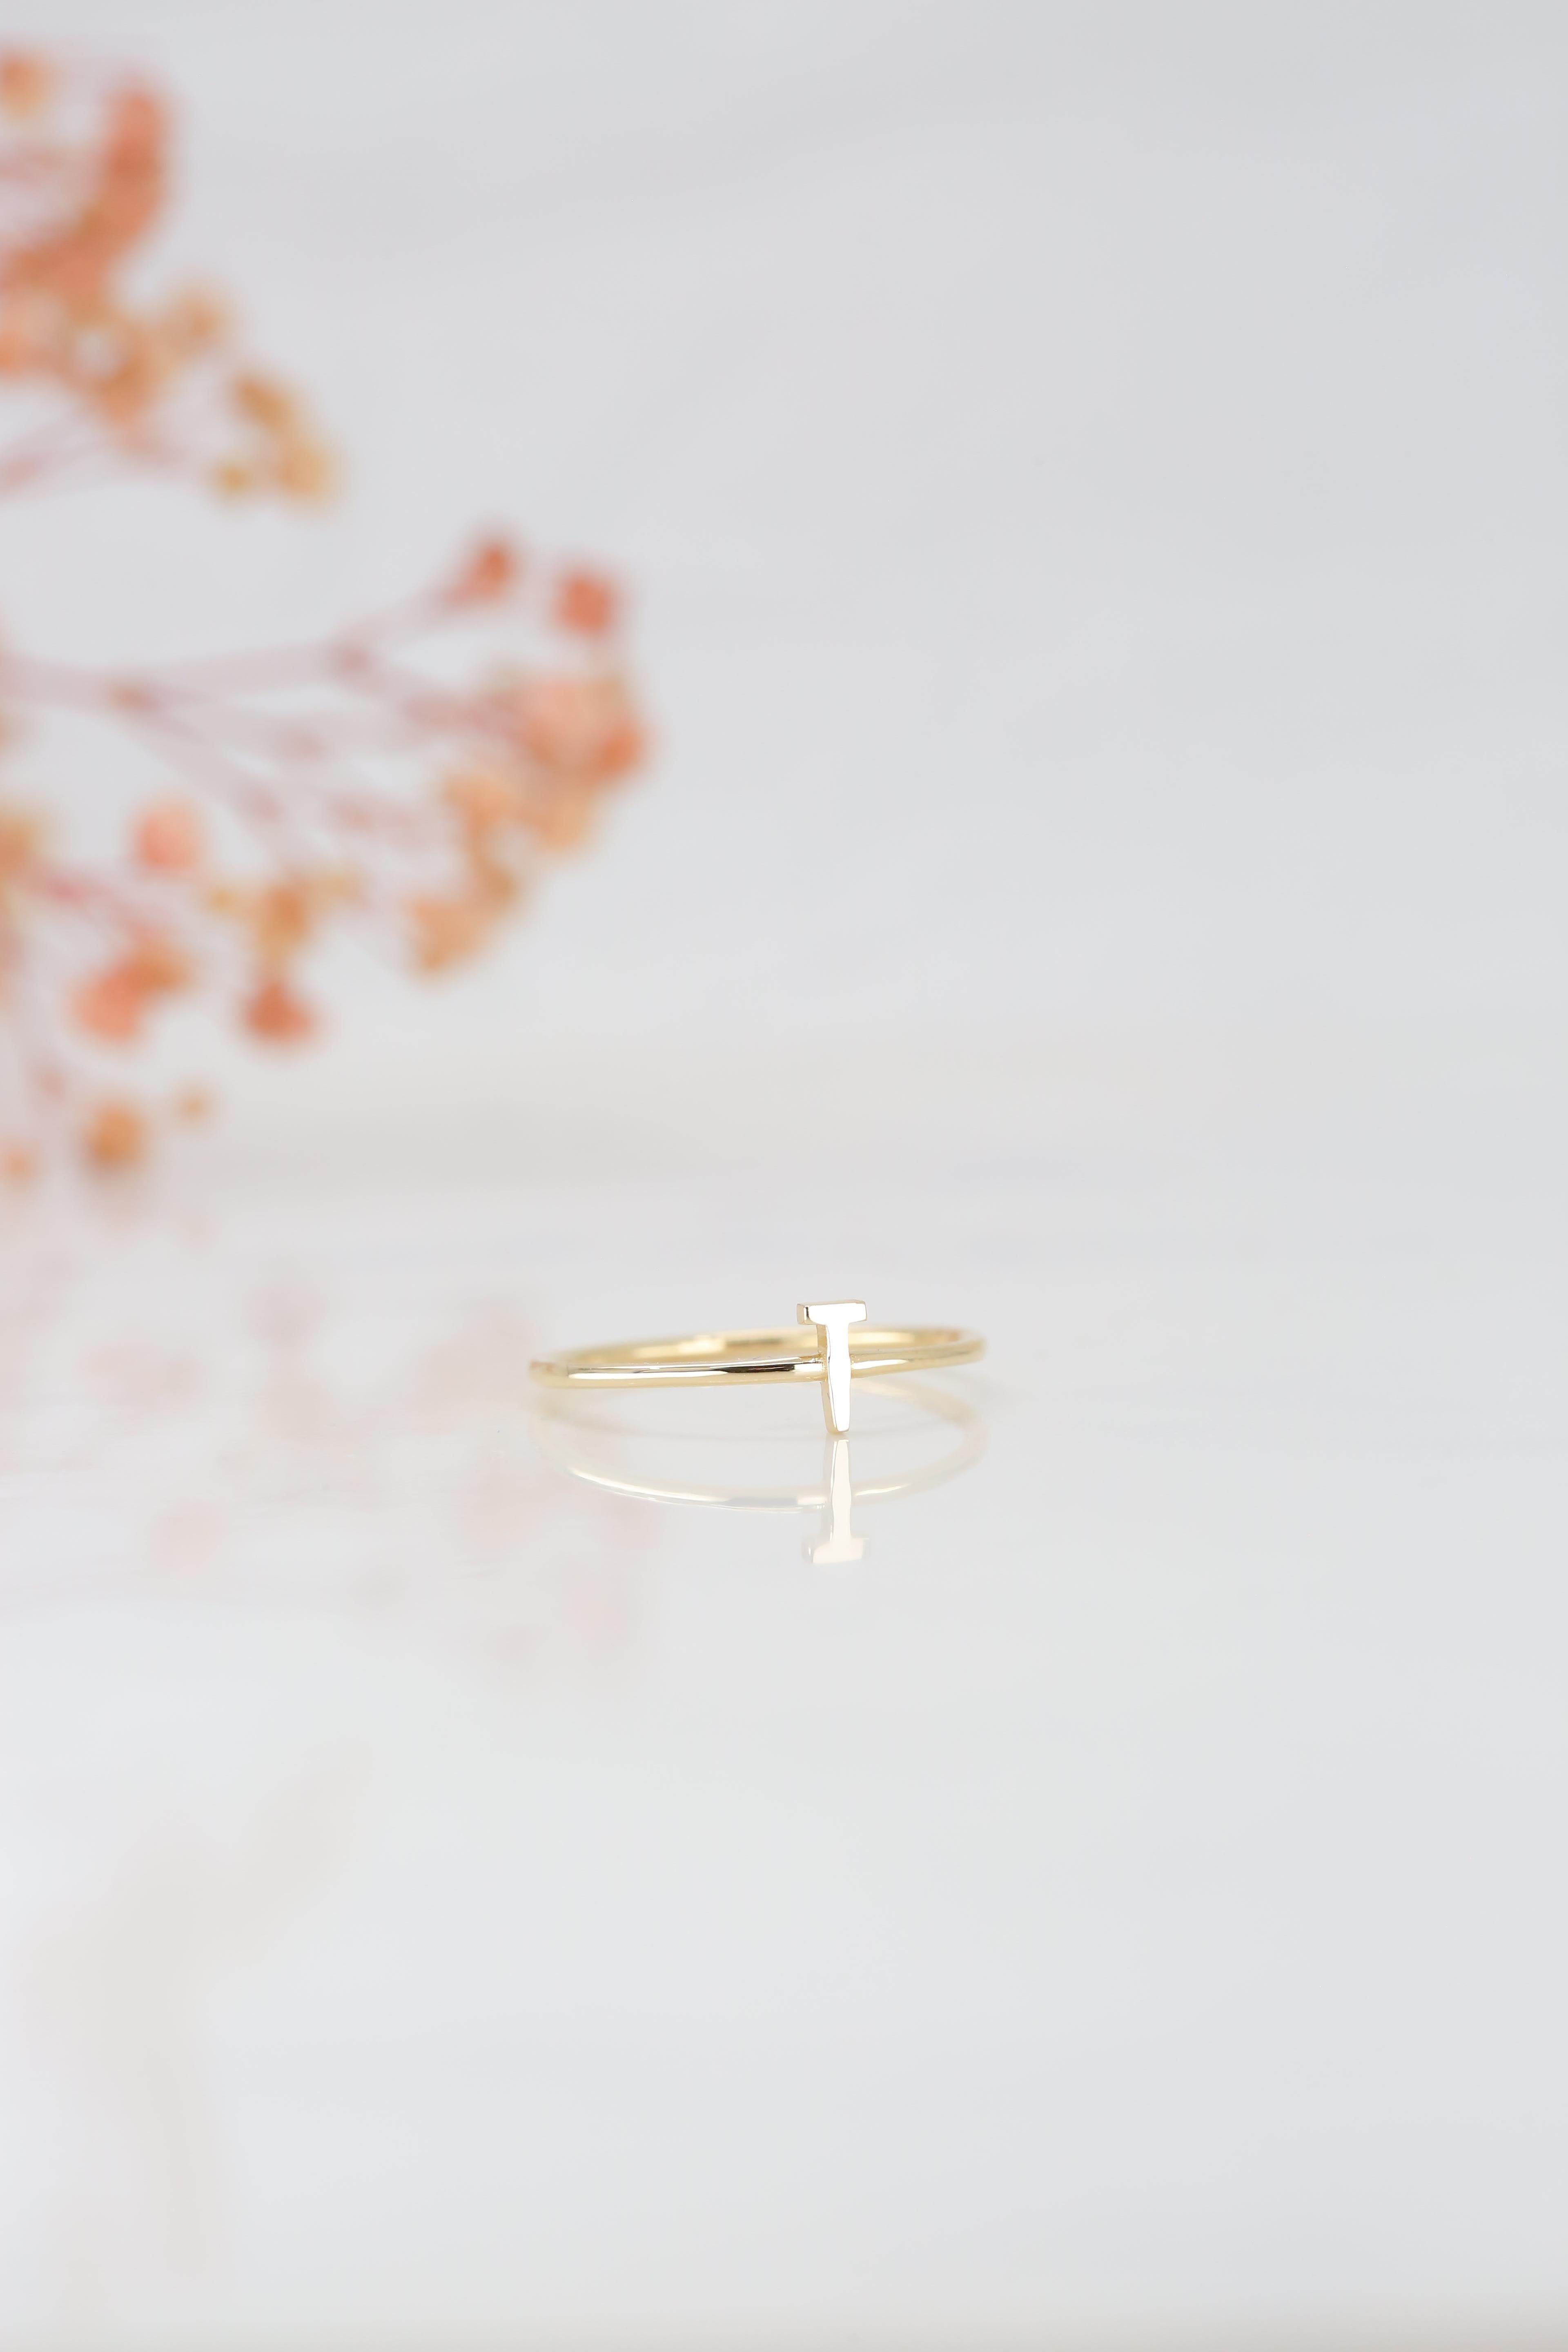 For Sale:  14K Gold Initial T Letter Ring, Personalized Initial Letter Ring 7